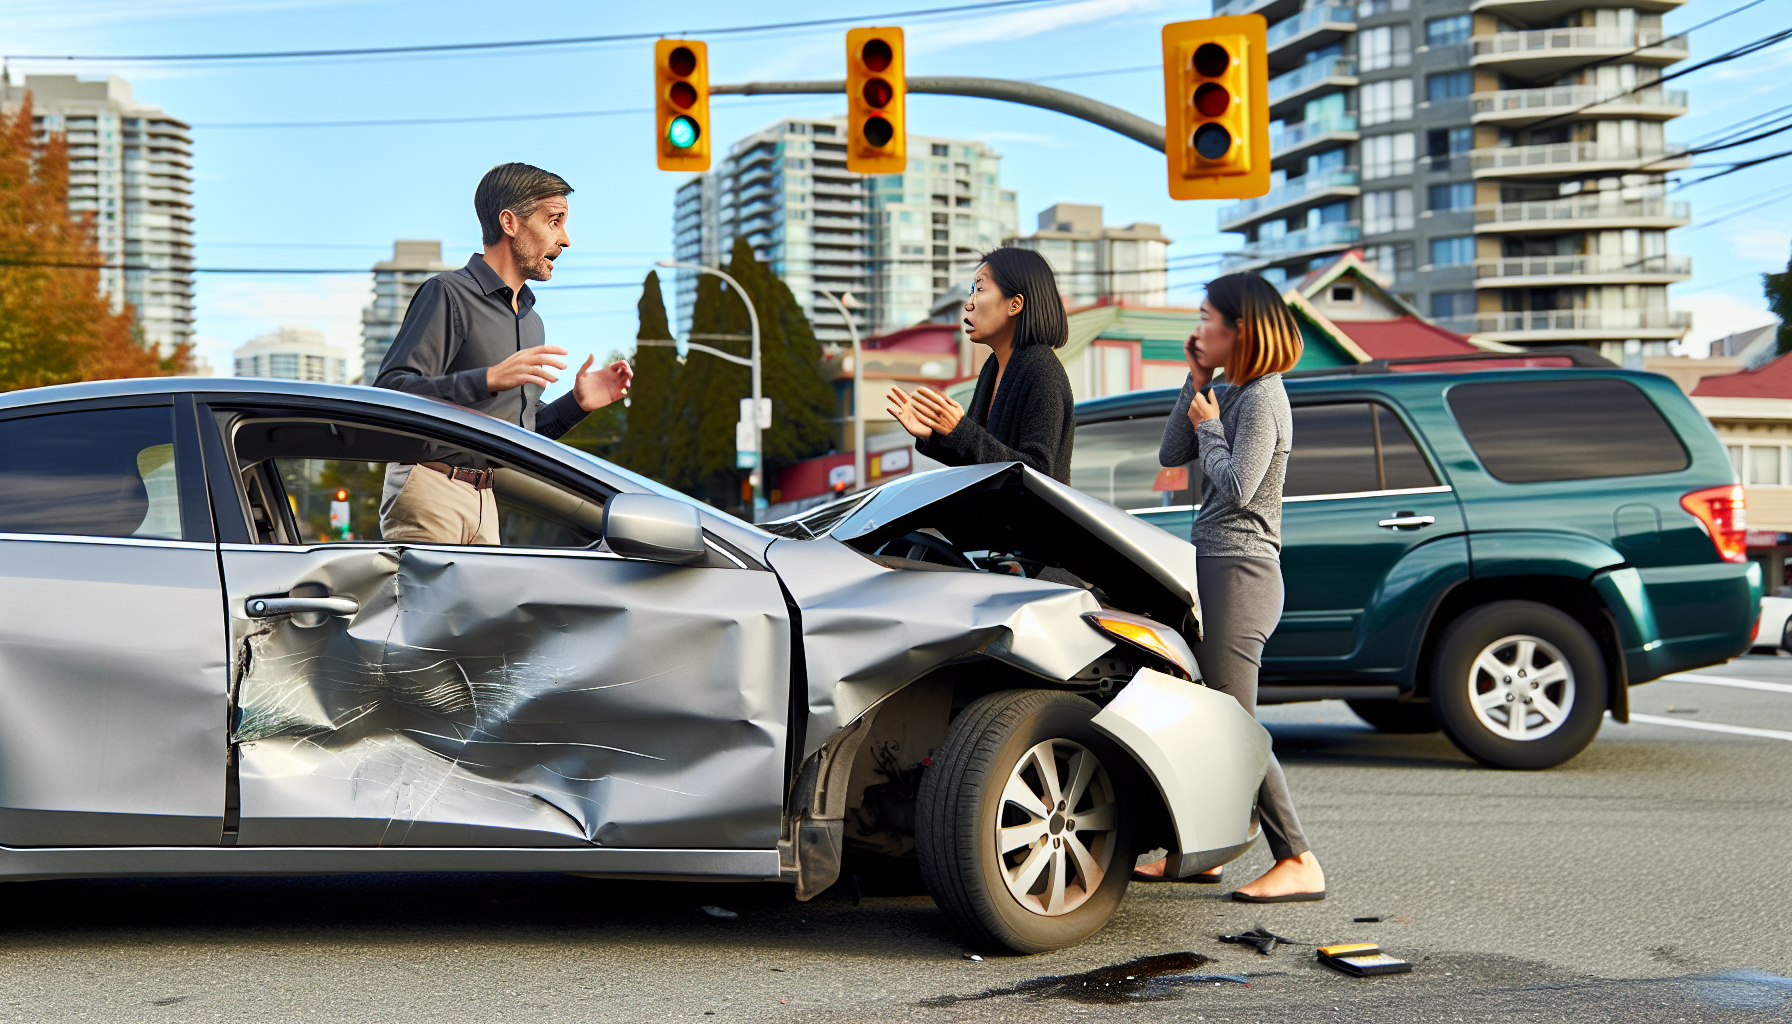 Car collision illustrating the need for collision coverage